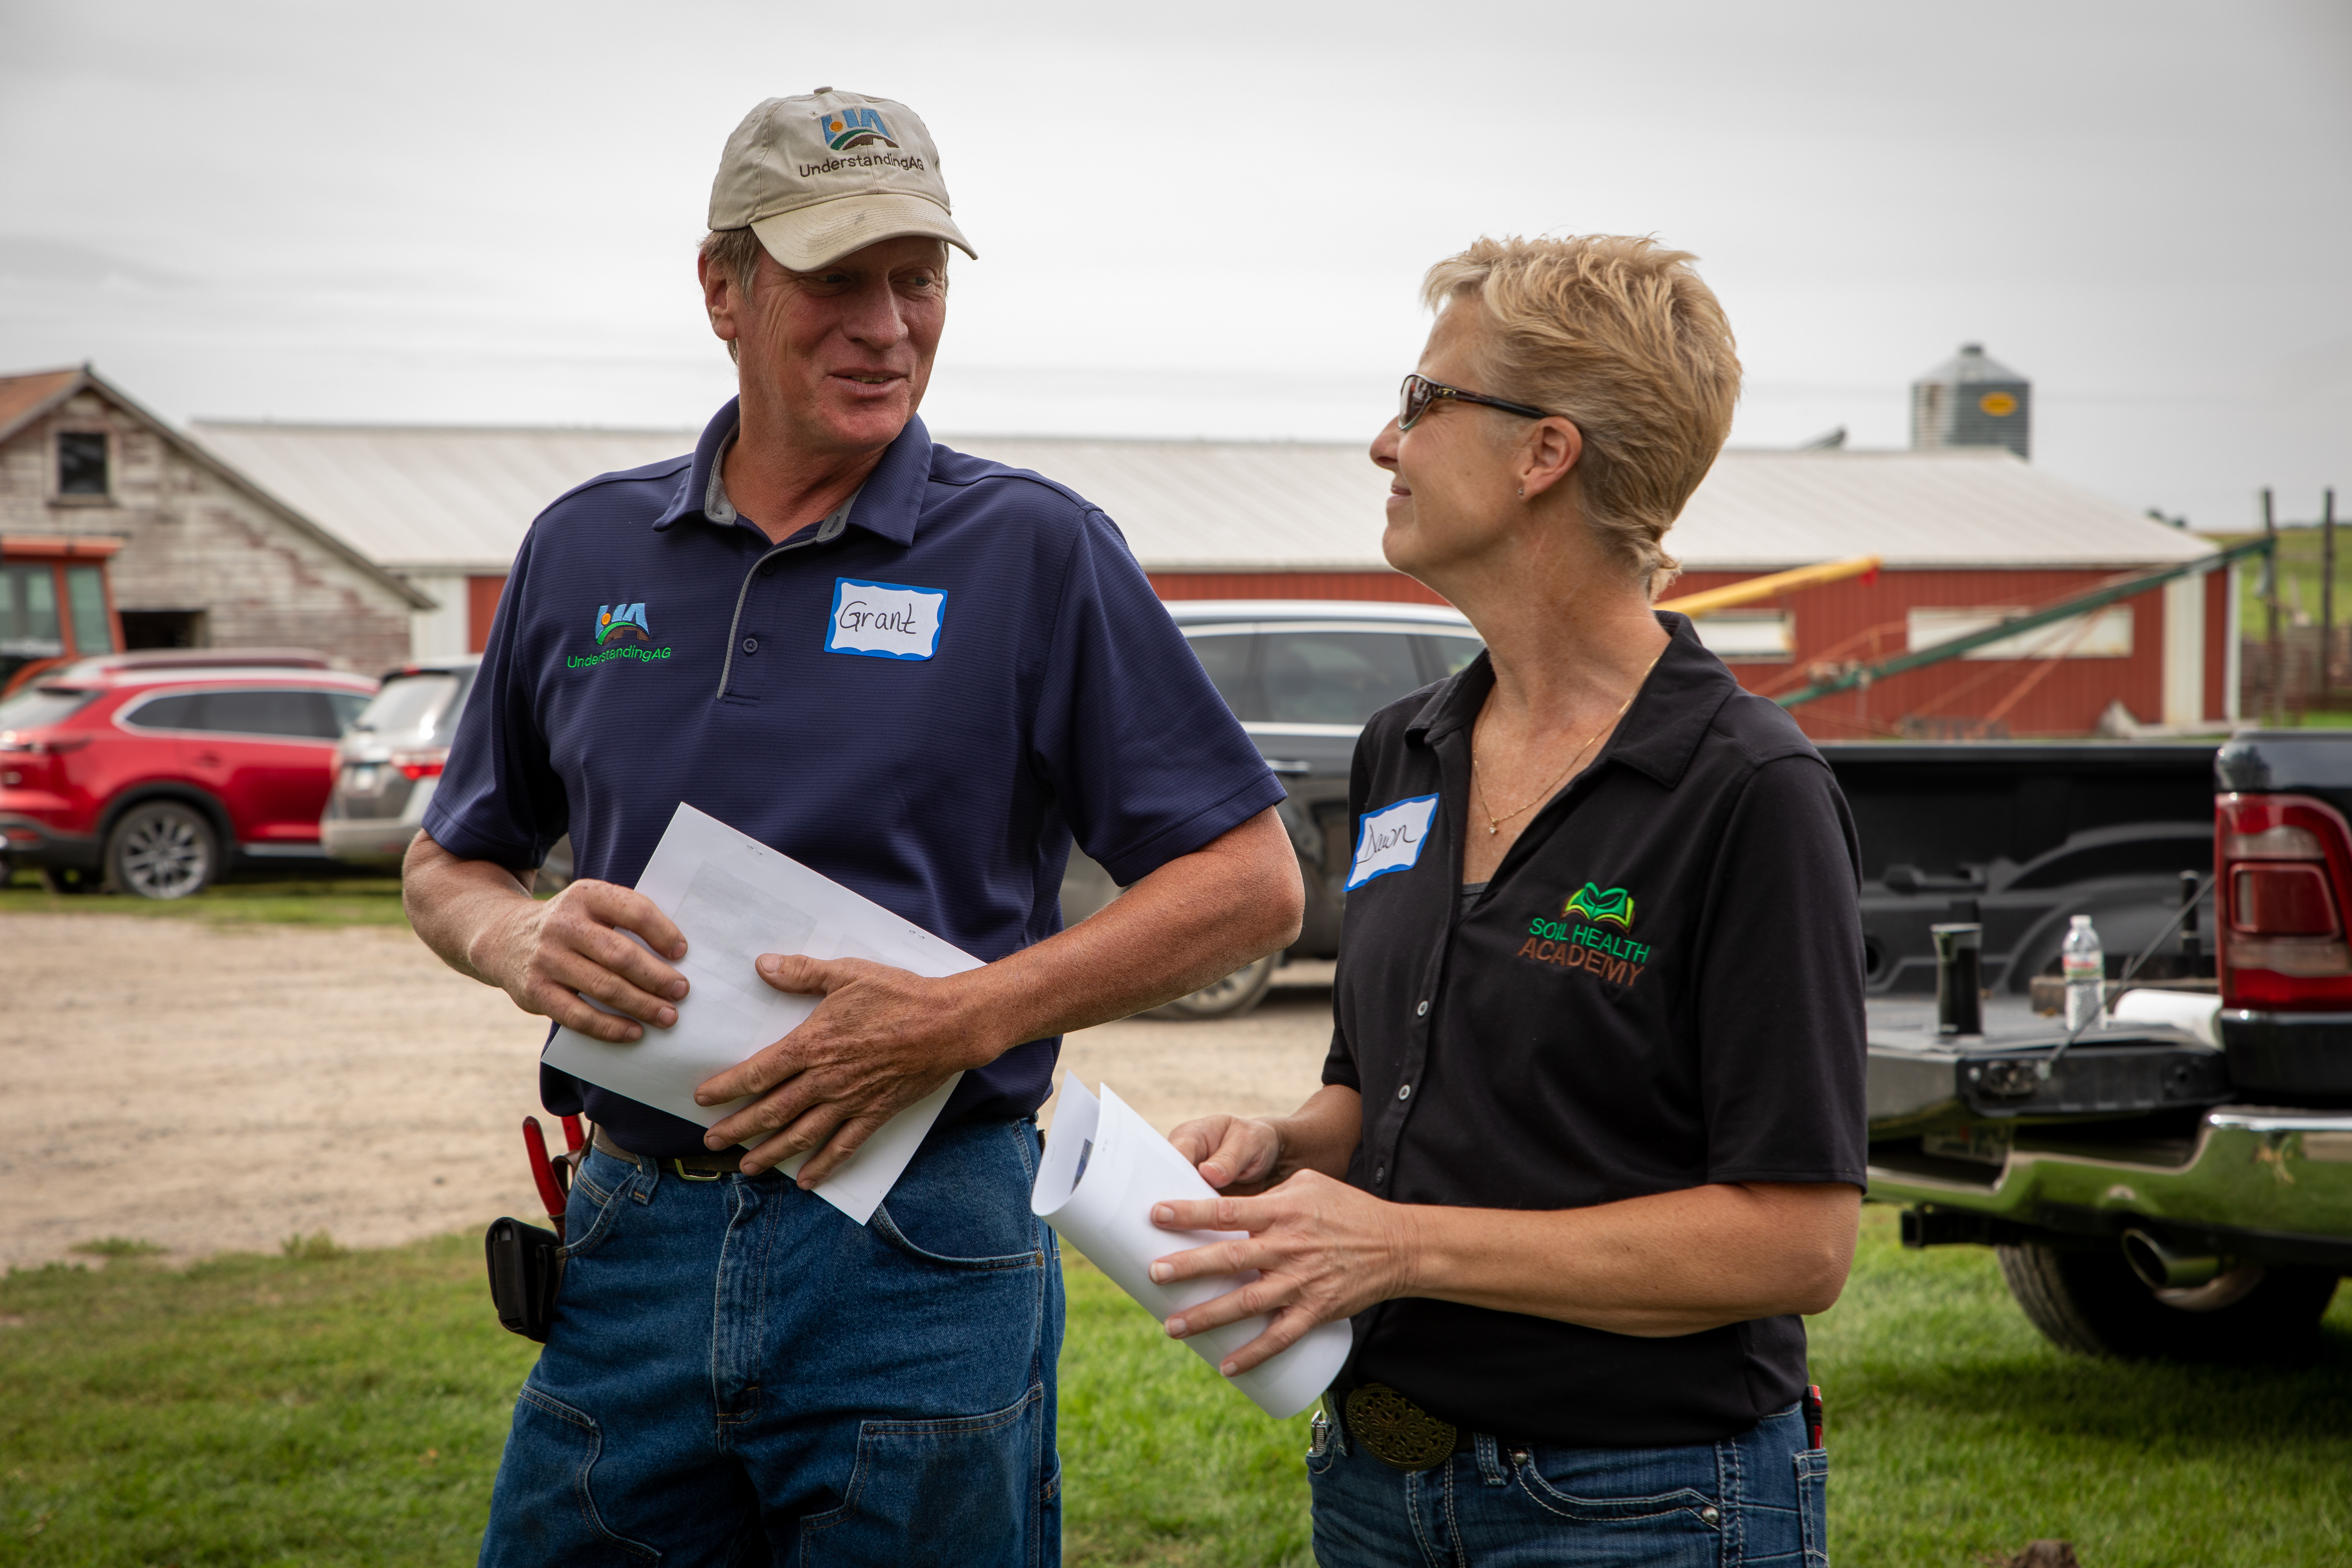 Man and woman talking at farm, holding papers